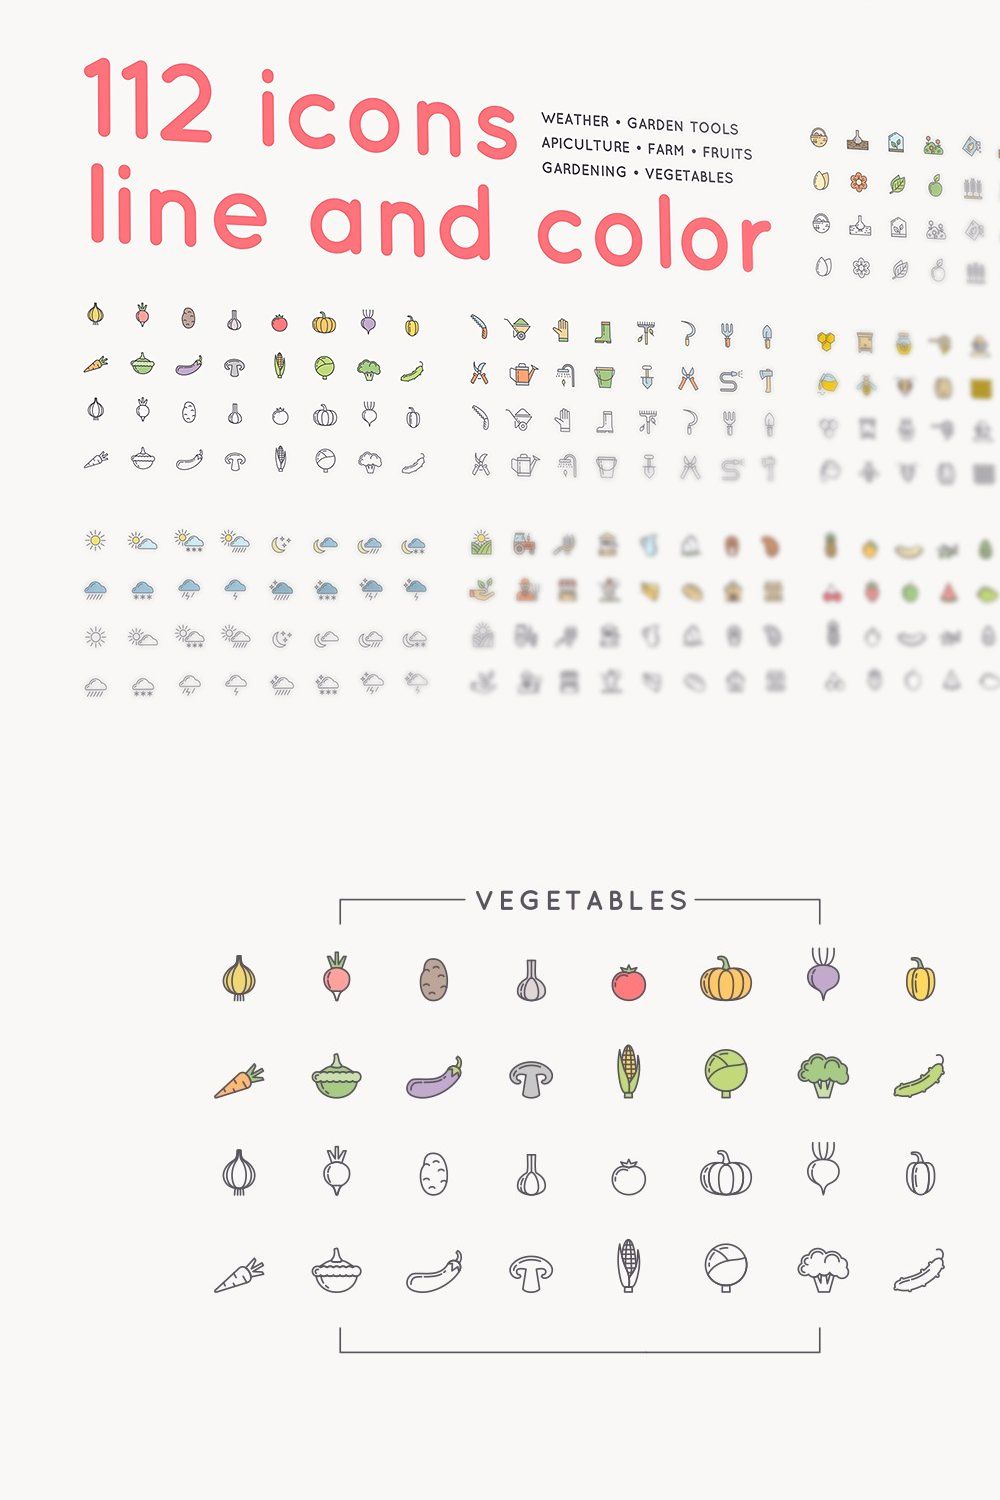 112 icons /farm/gardening/apiculture pinterest preview image.